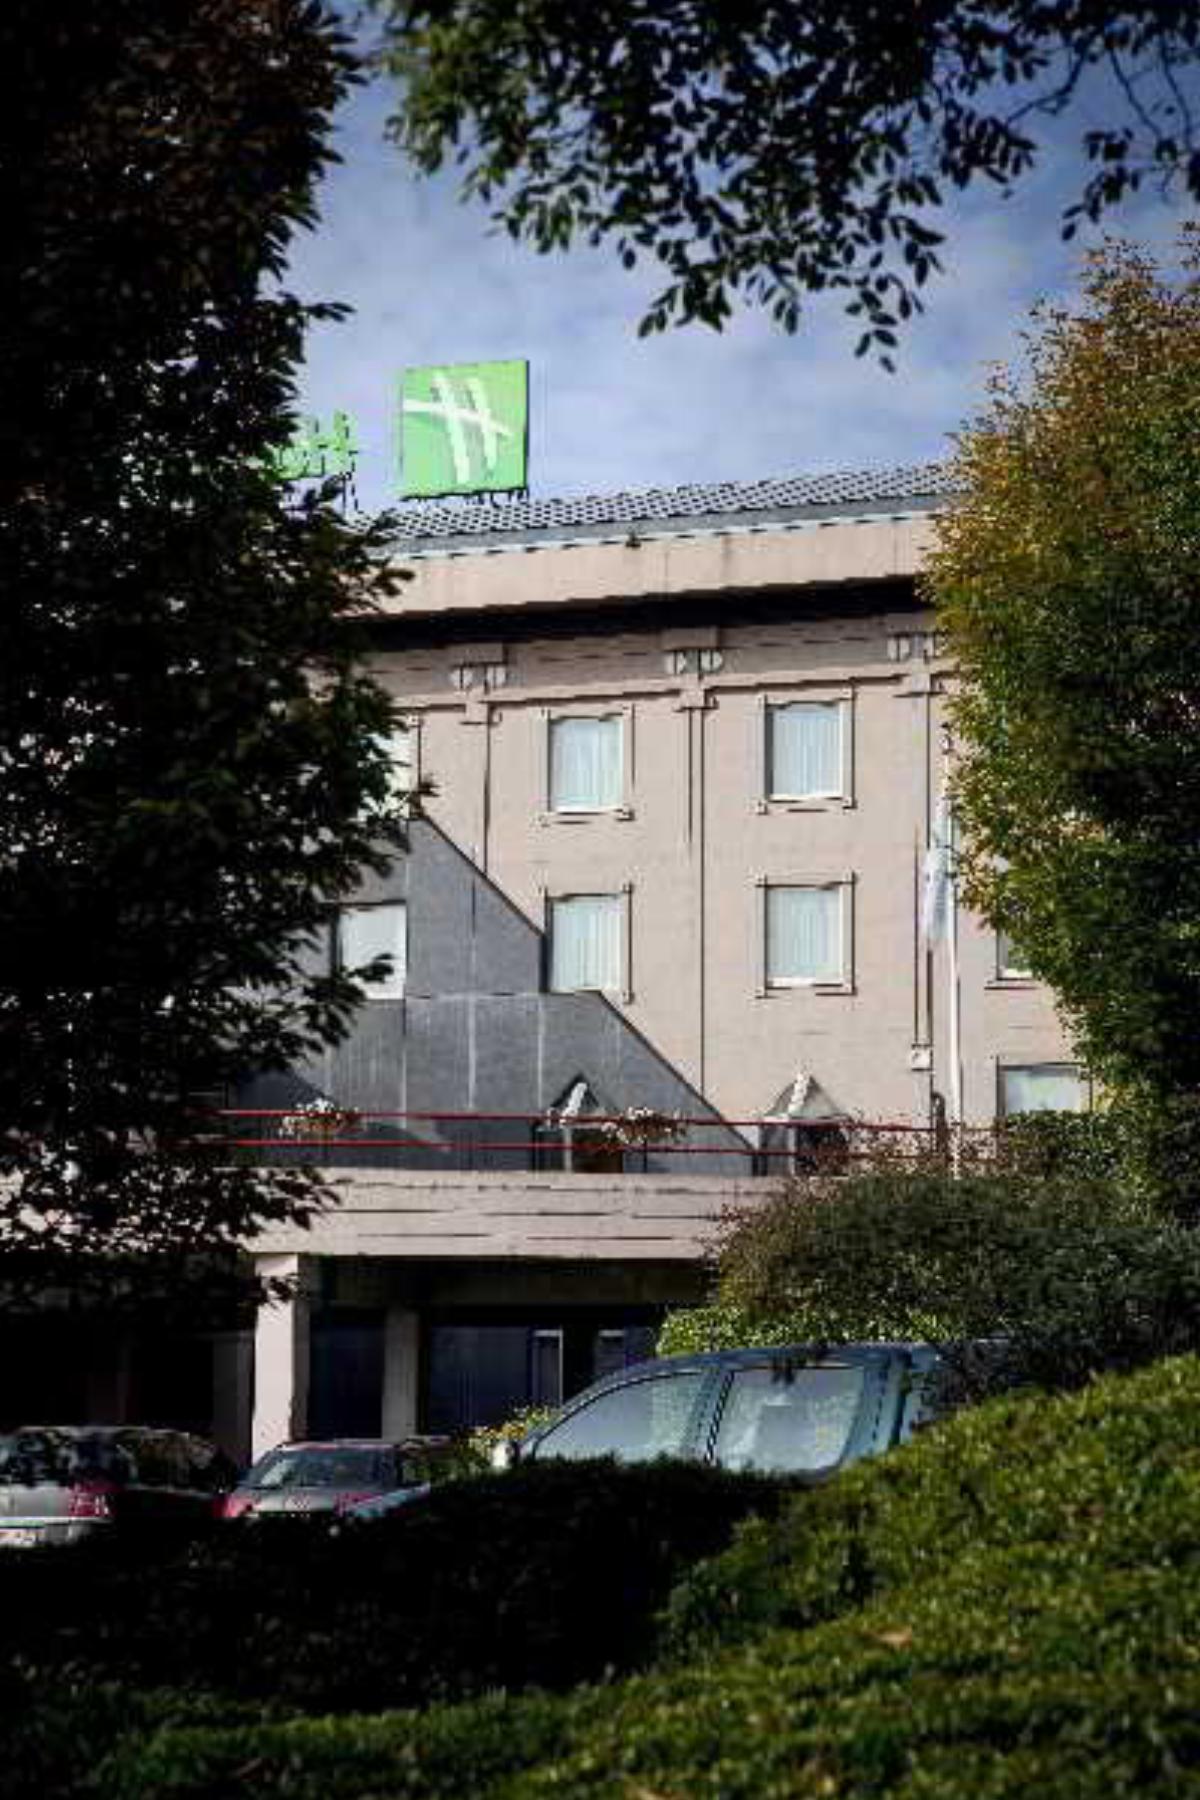 Holiday Inn Gent Expo Hotel Ghent Belgium